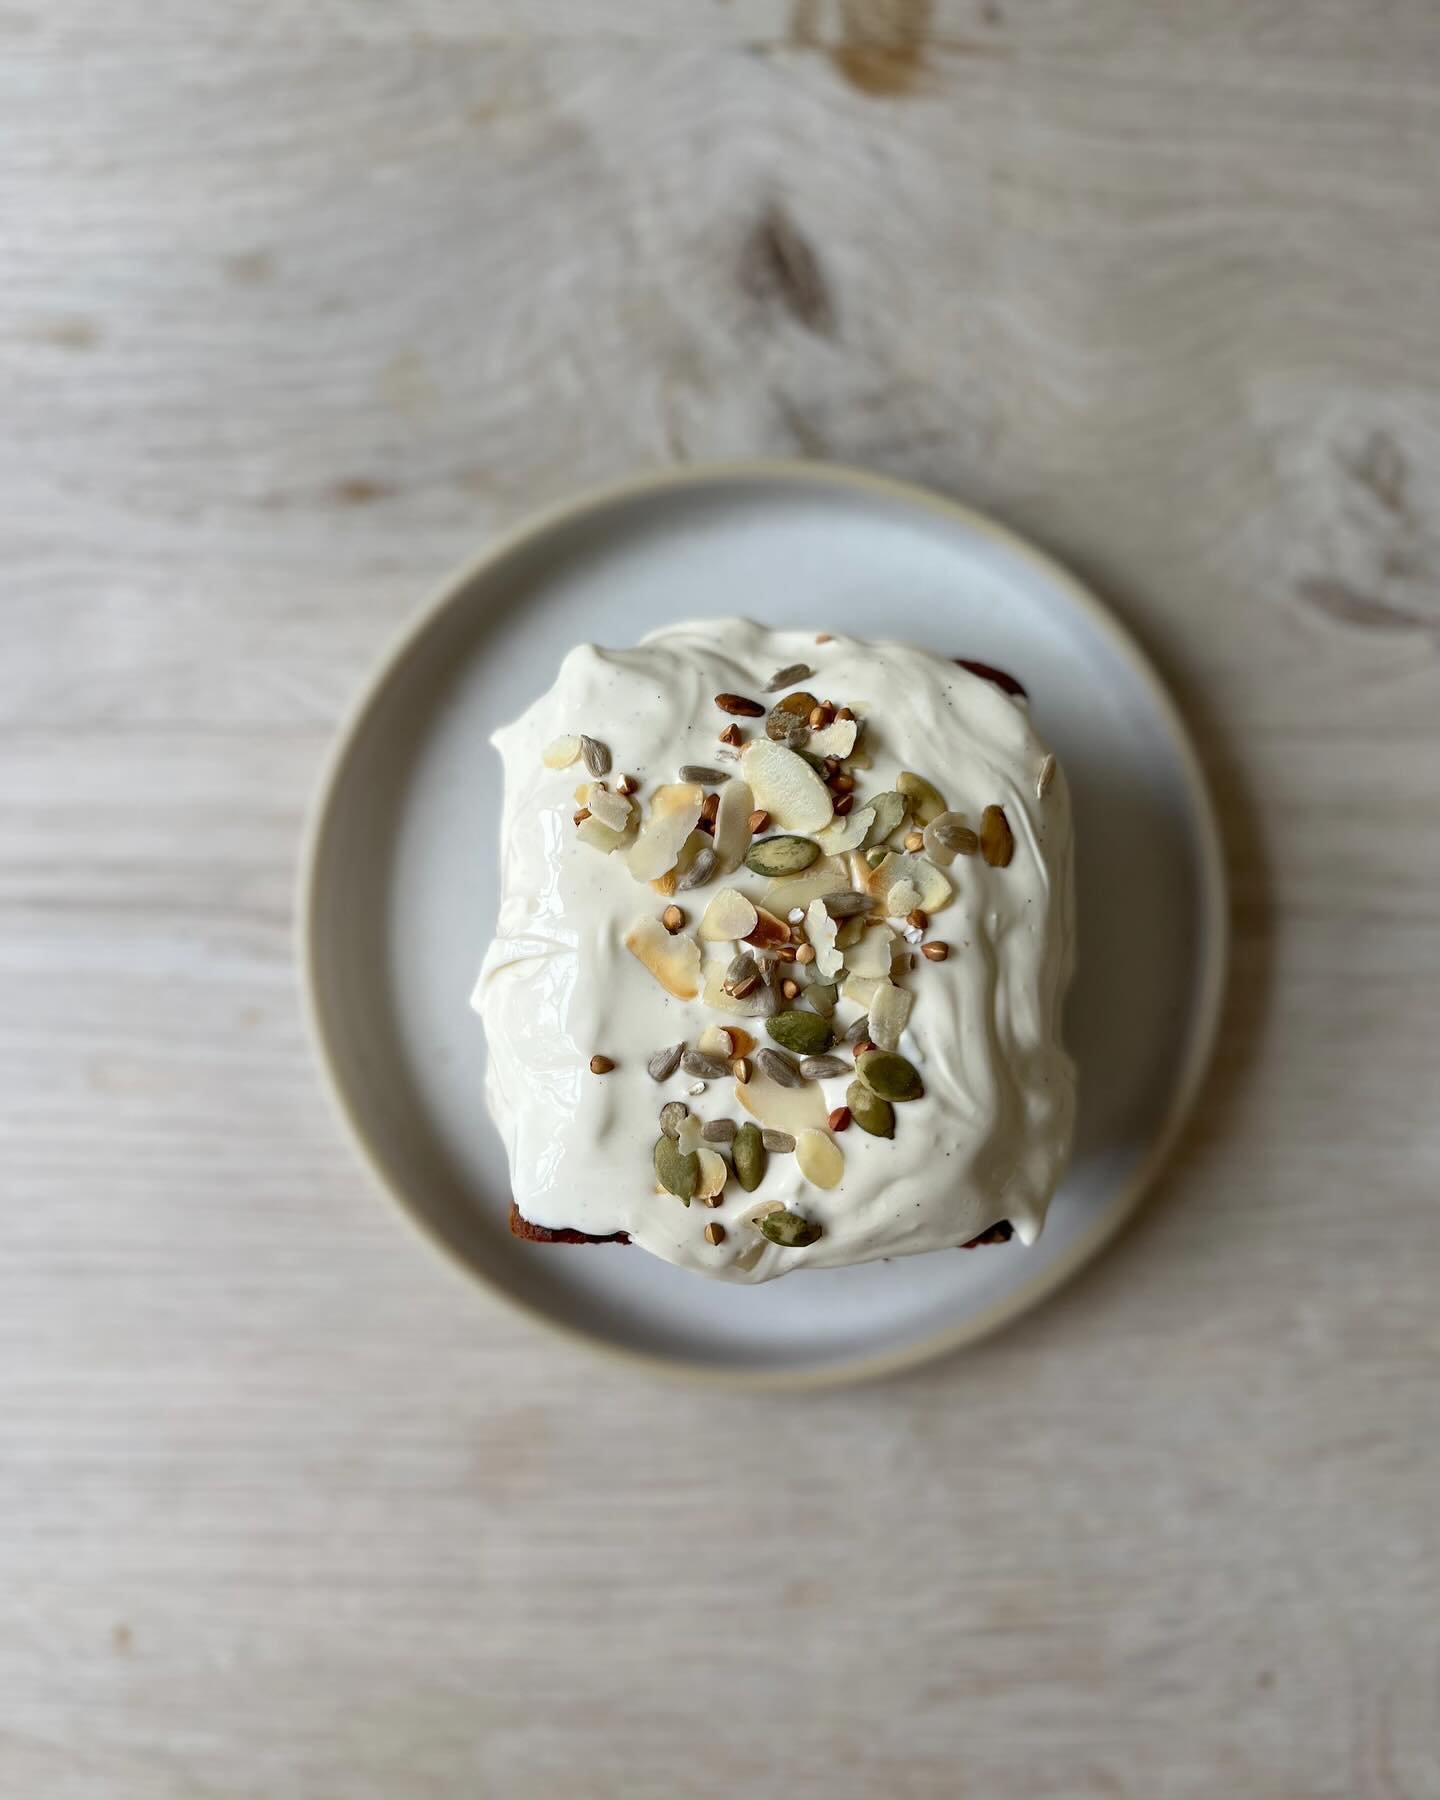 When you don&rsquo;t know how to take your daily dose of adaptogens, just follow that cosmic delicacy curated by @sistersspoons 🪐🤤

Here is the recipe of this spiced carrot cake with ashwagandha cream cheese frosting 🧁 ☀️

* 100ml olive oil
* 2 eg